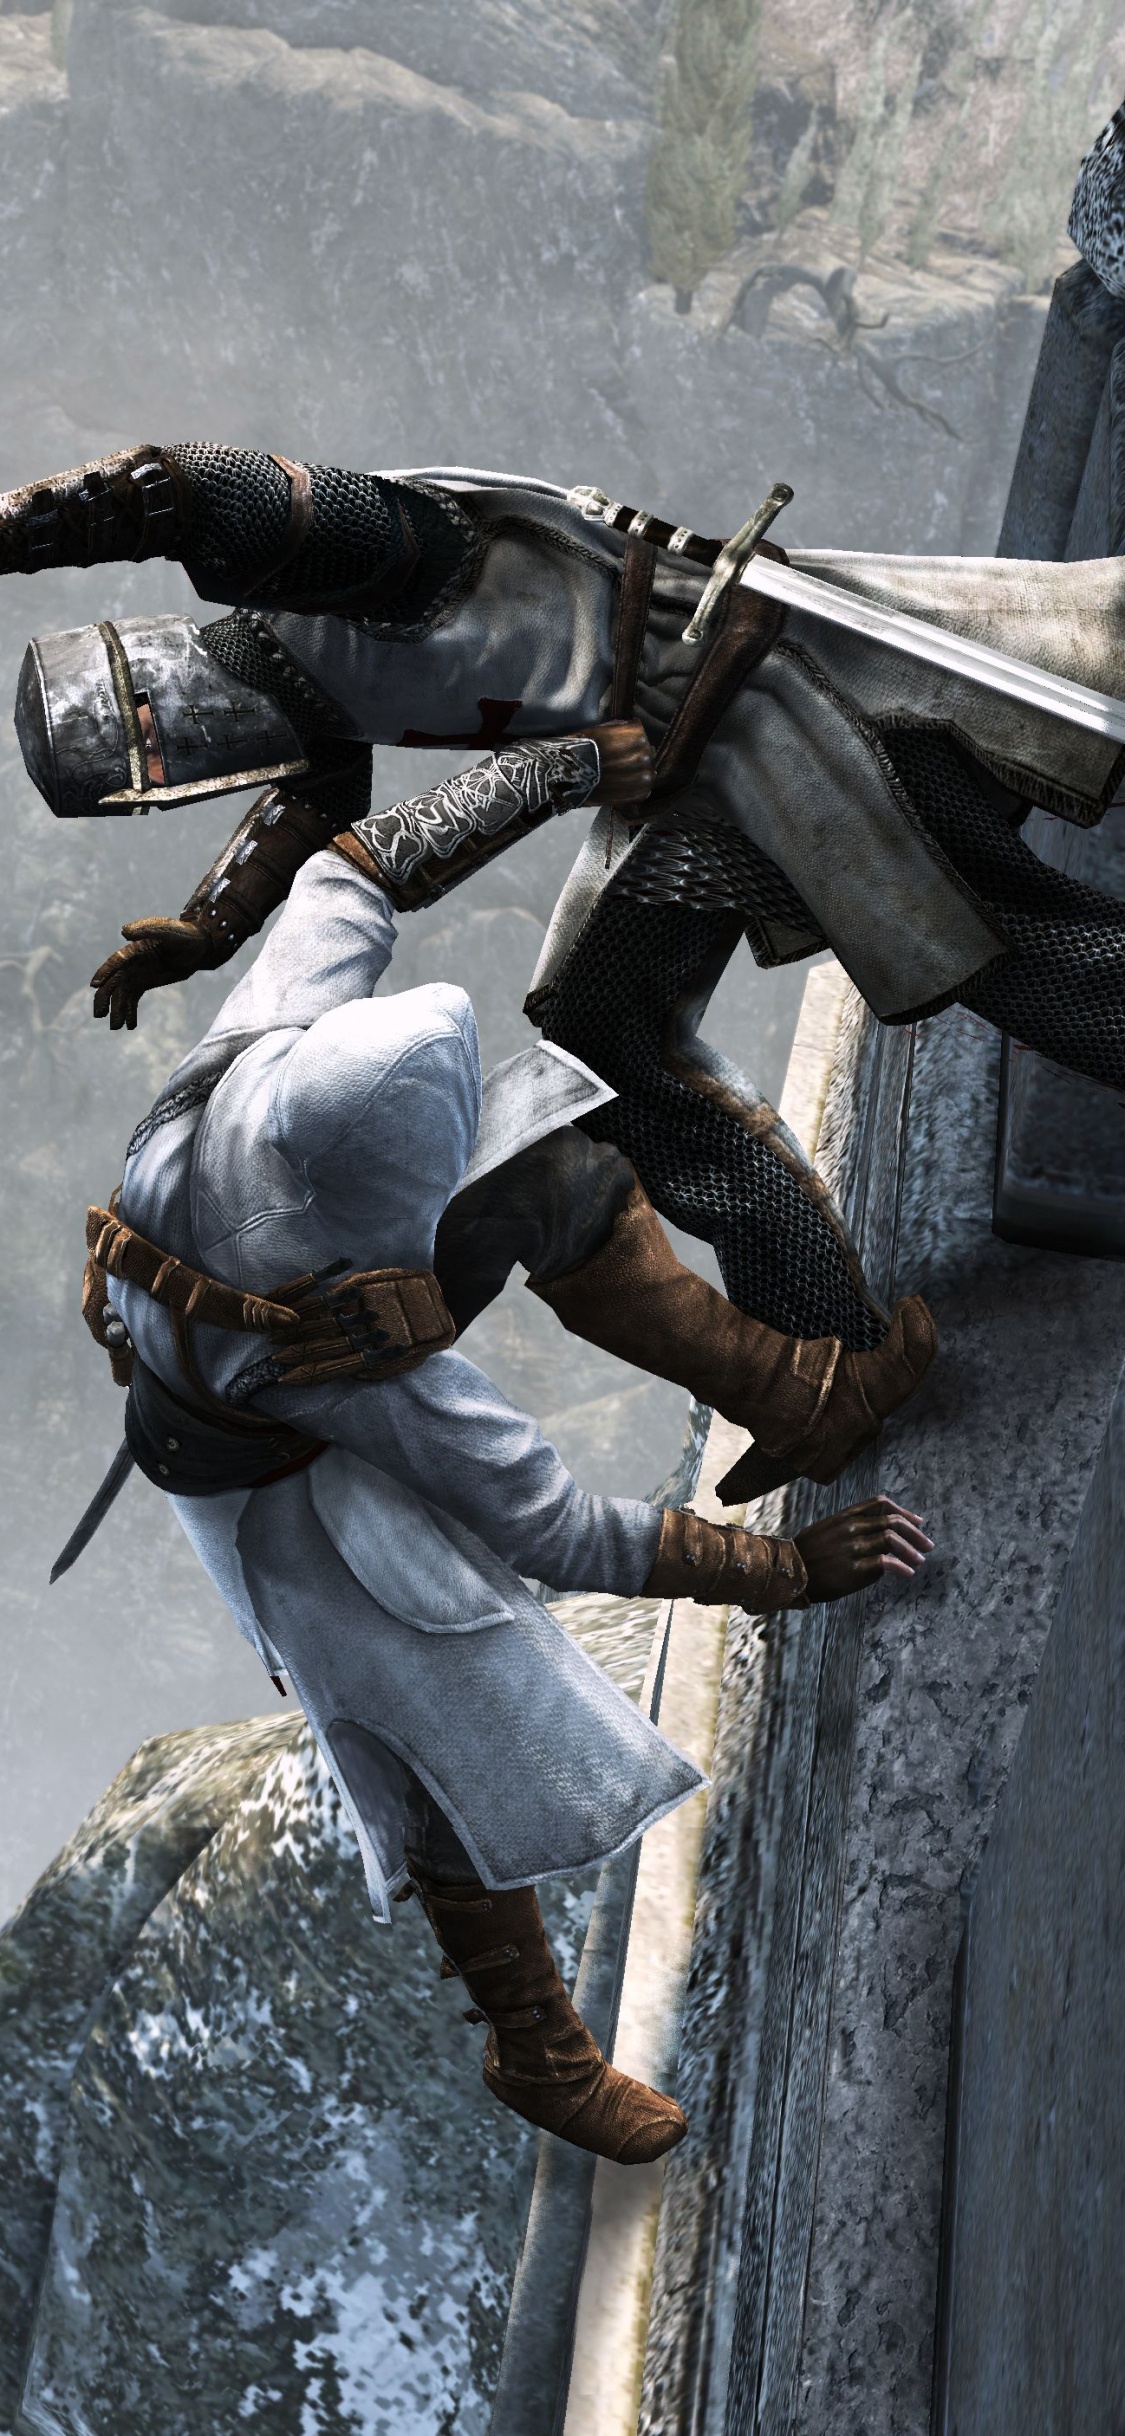 Assassins Creed, Assassins Creed Revelations, Assassins Creed Brotherhood, Assassins Creed III, Ezio Auditore. Wallpaper in 1125x2436 Resolution